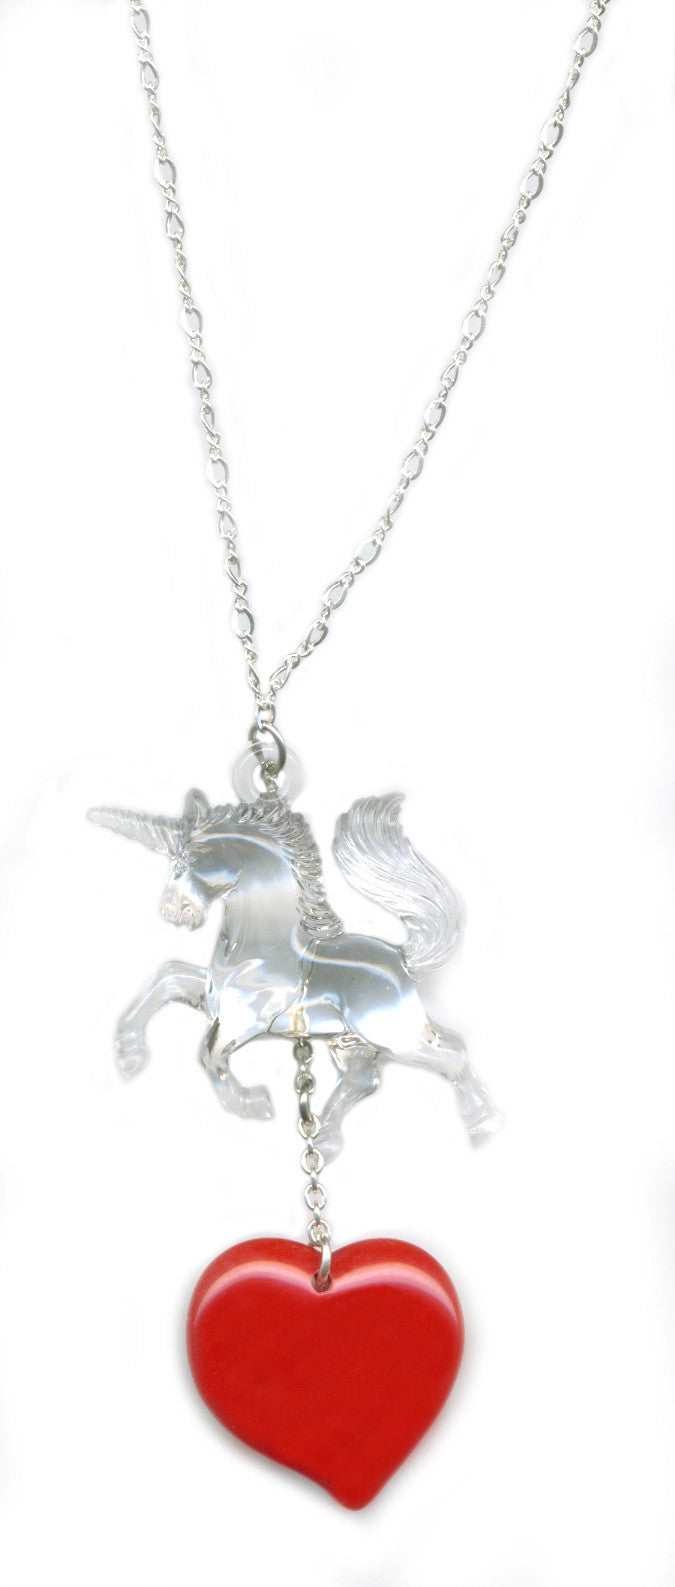 Winged Heart Necklace - Family Affairs